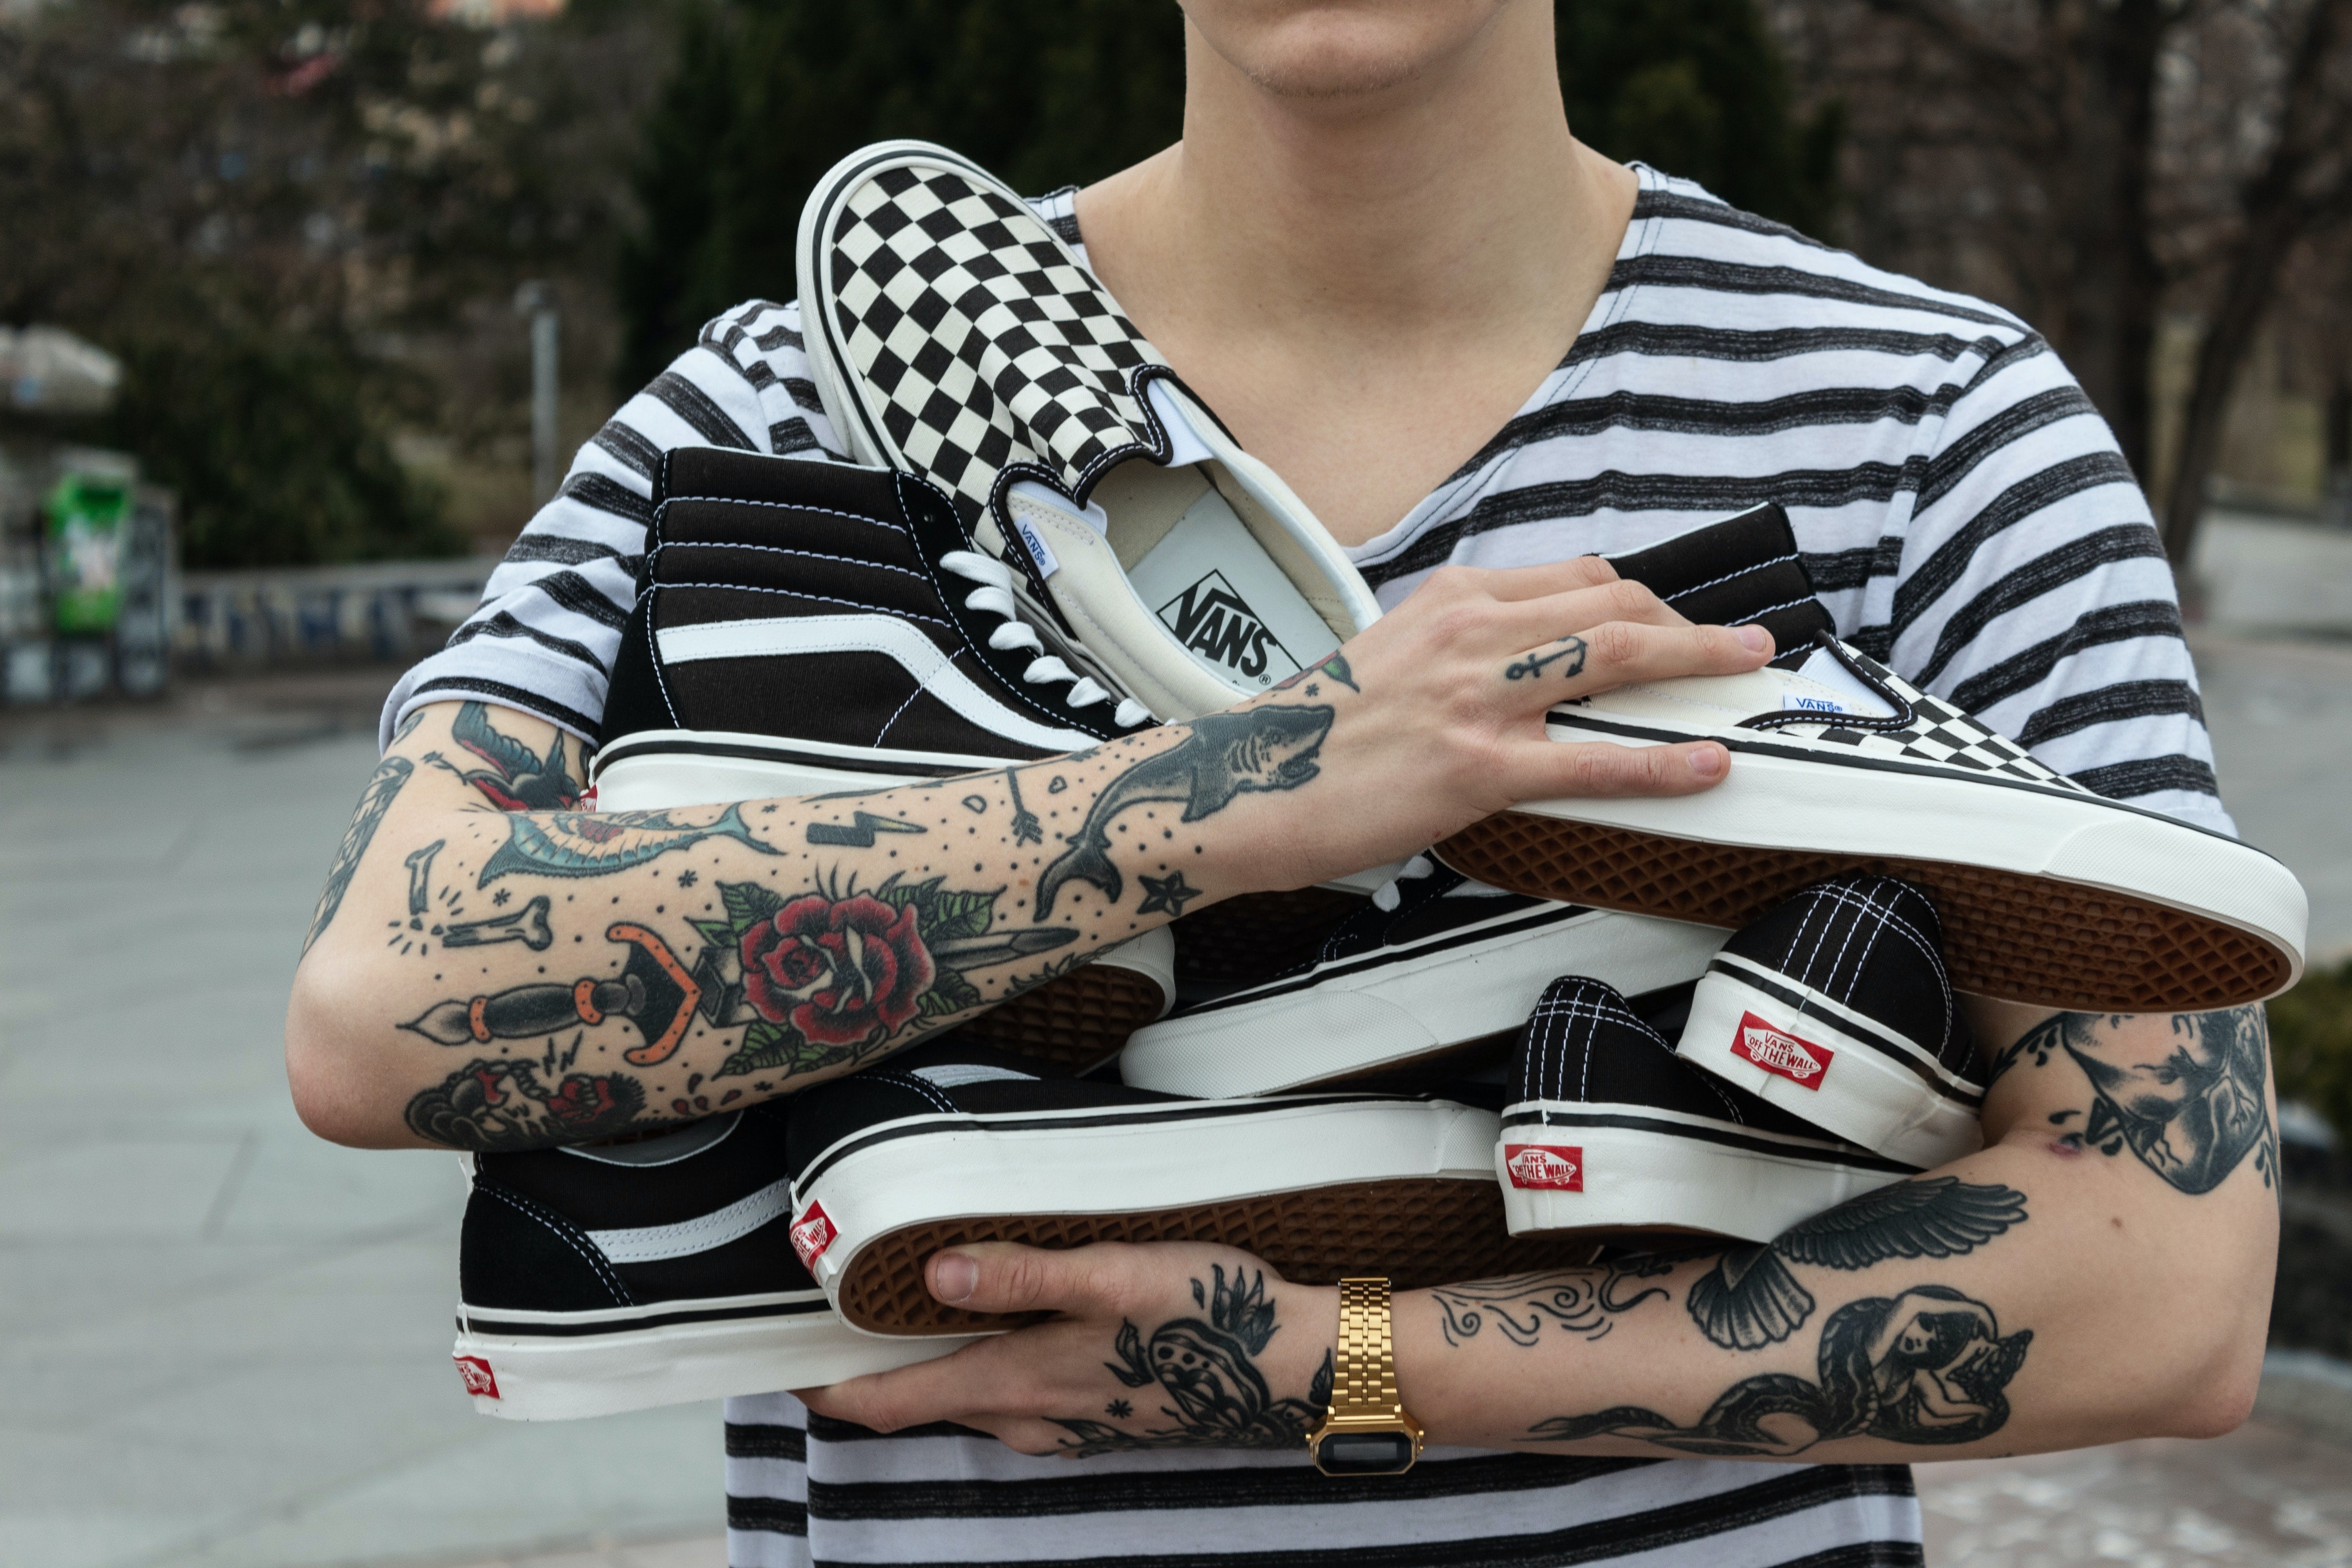 10 Vans Shoes [An Guide, With Editor-Approved Picks]